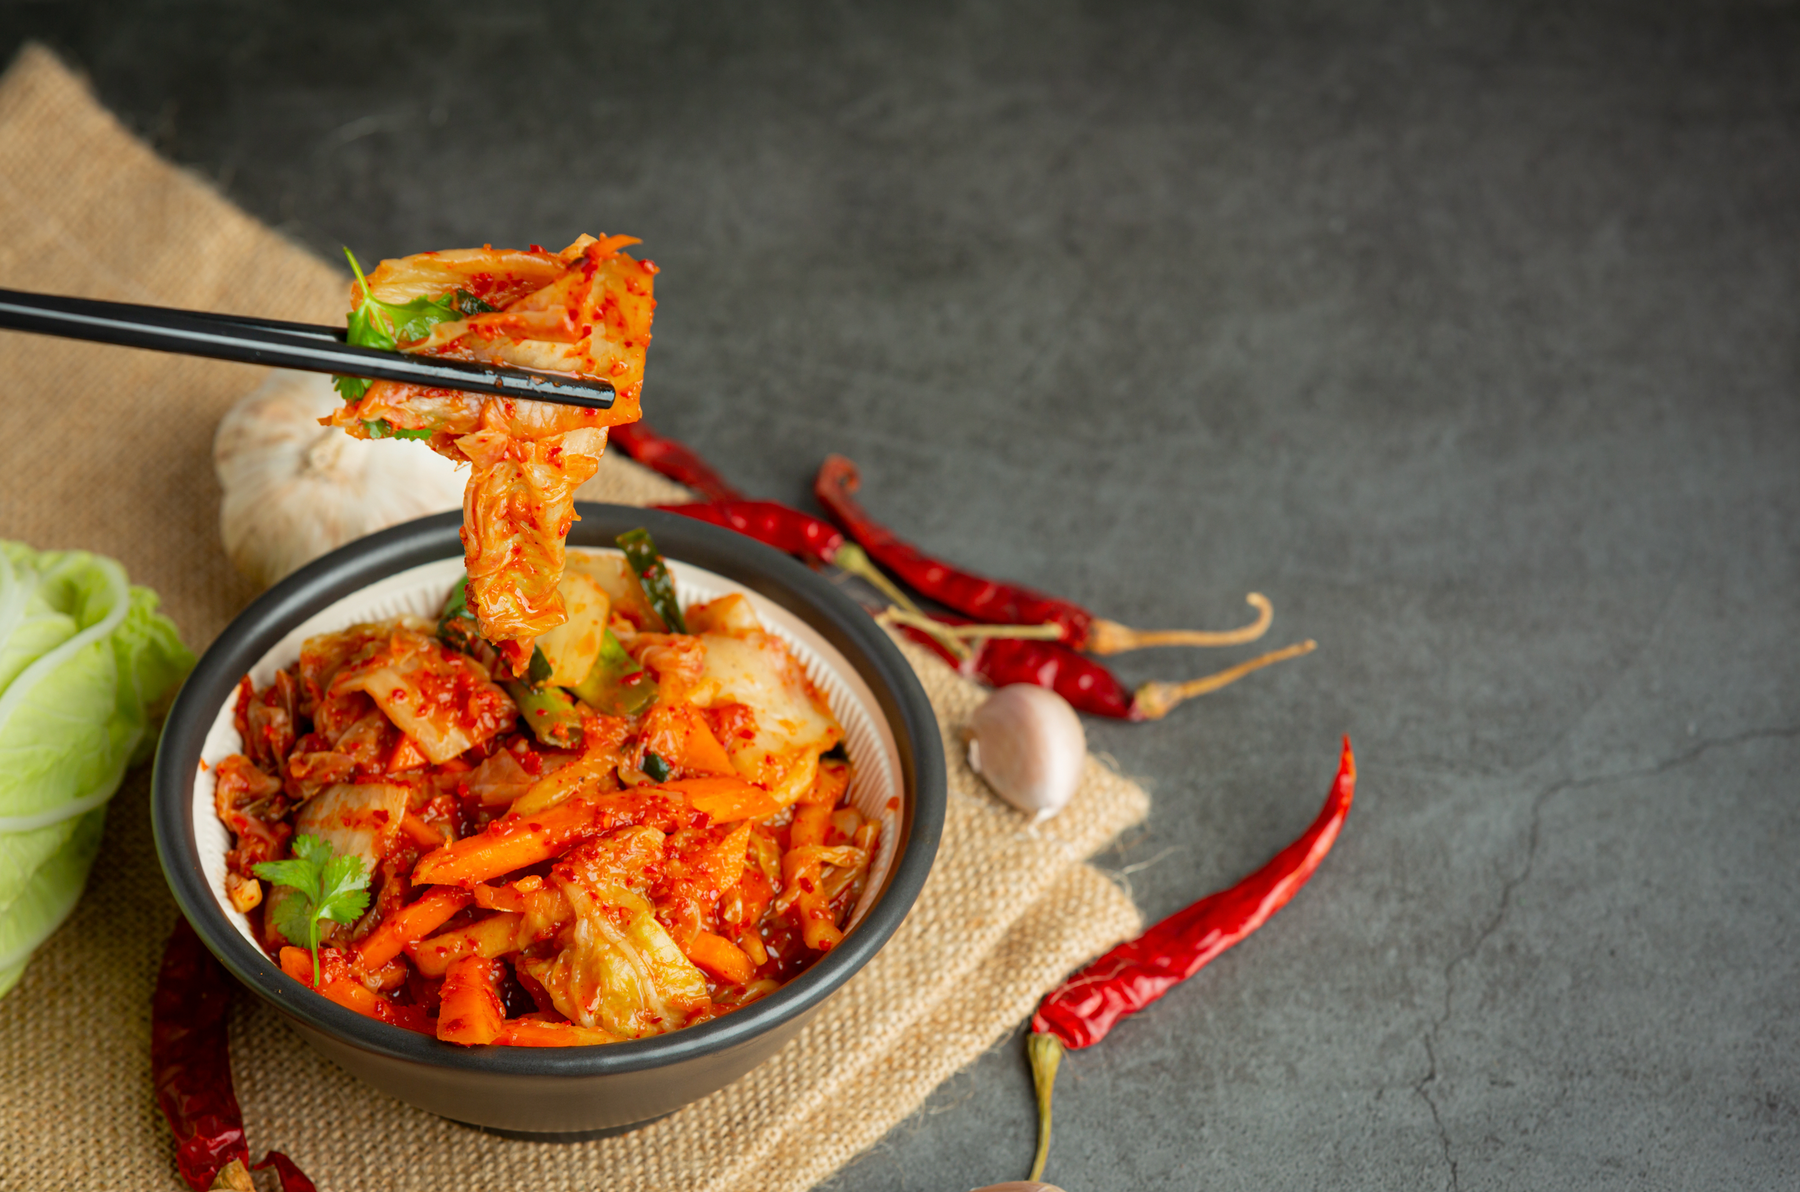 A Brief Introduction To The Health Benefits of Kimchi